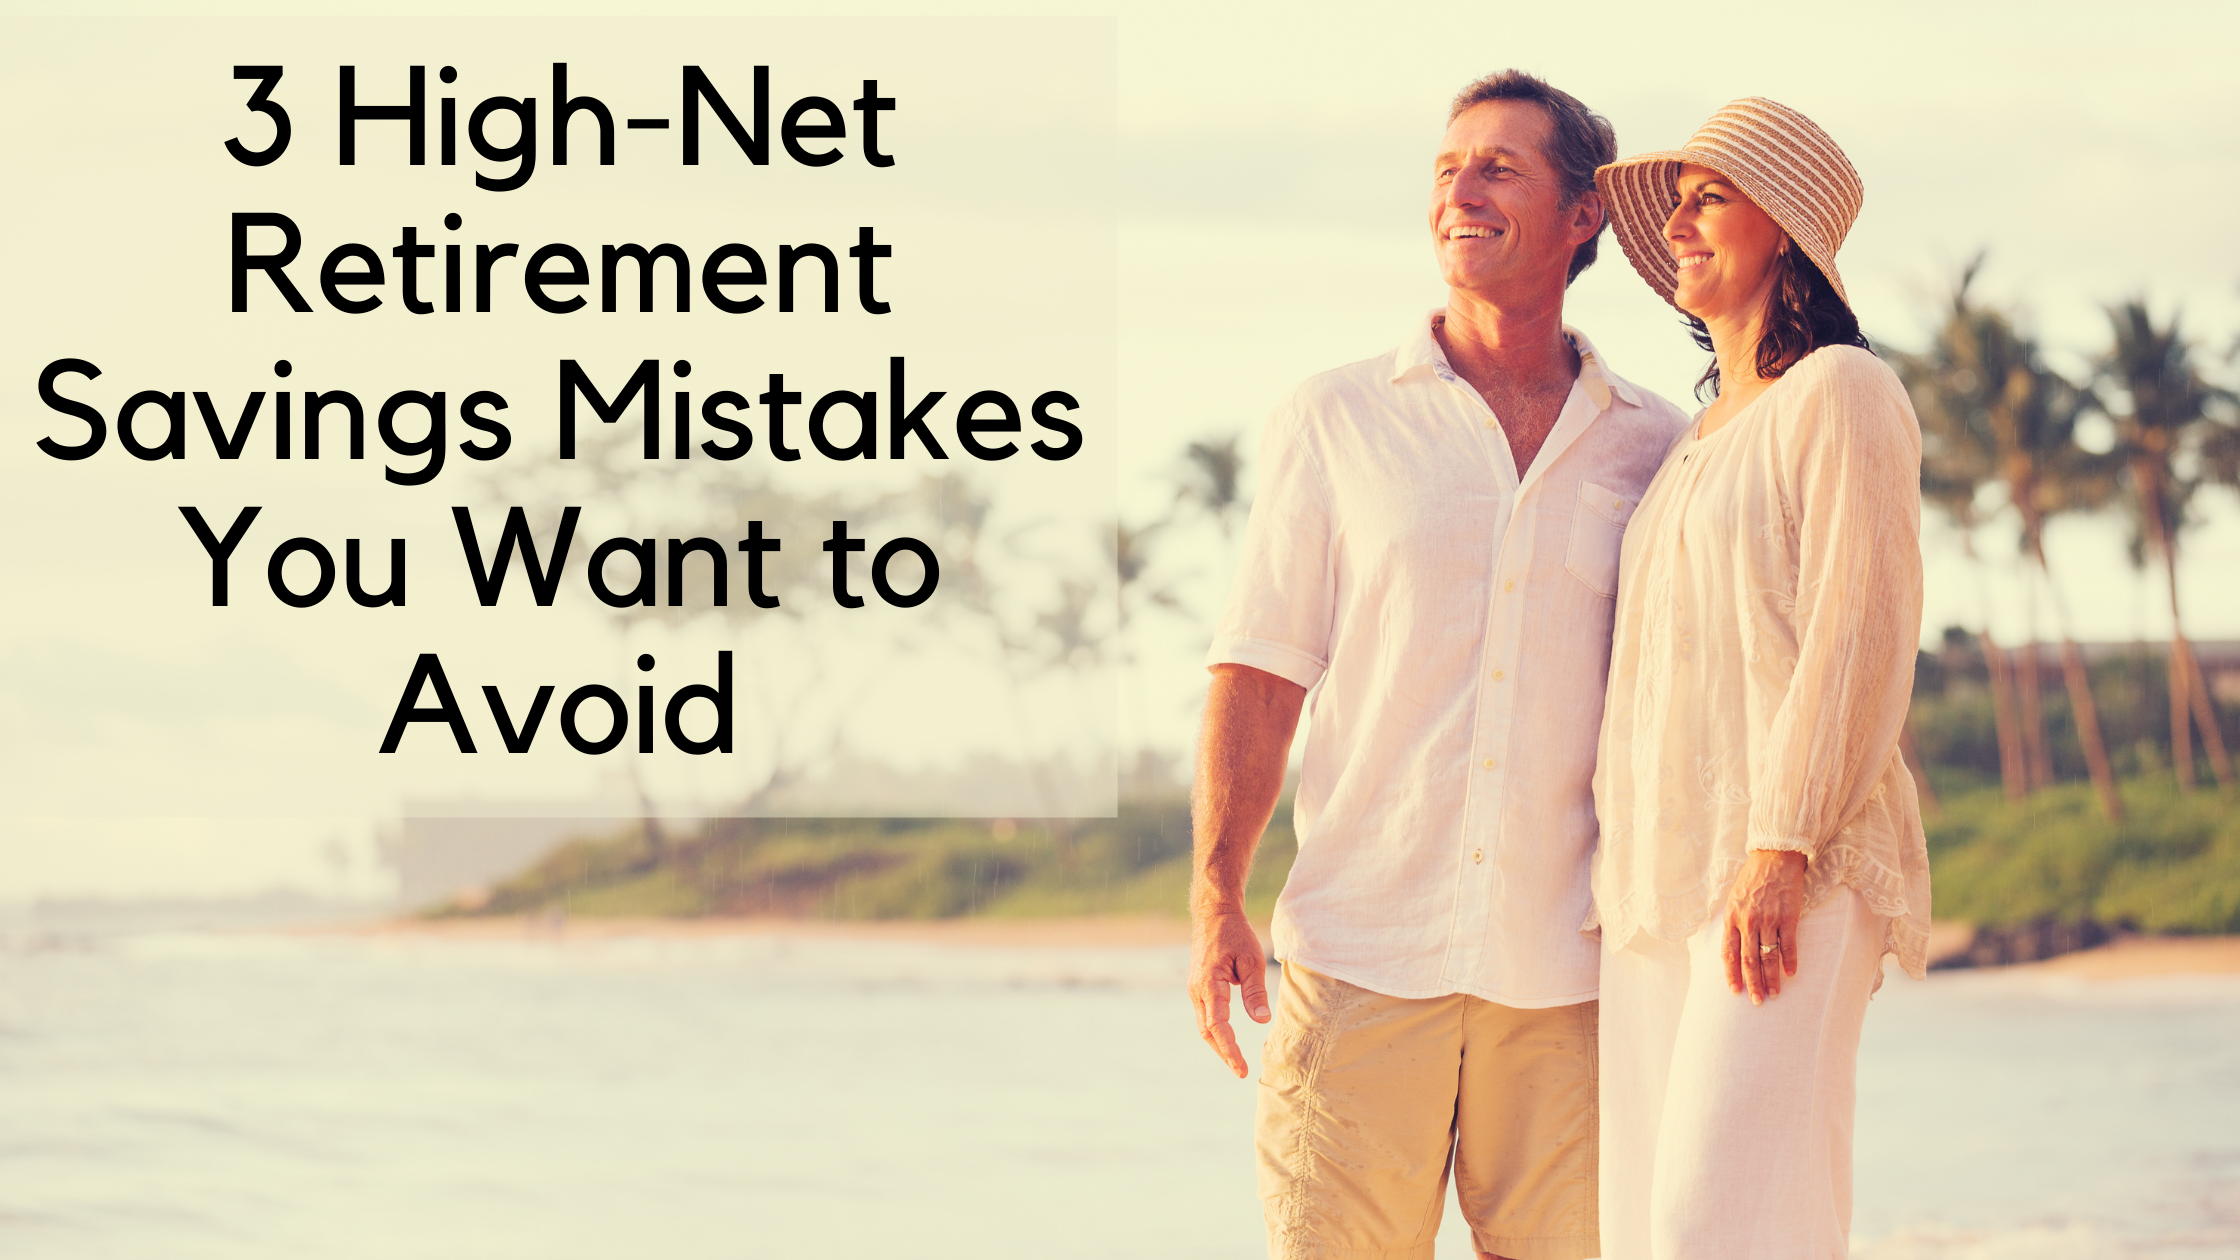 3 High-Net Retirement Savings Mistakes You Want to Avoid